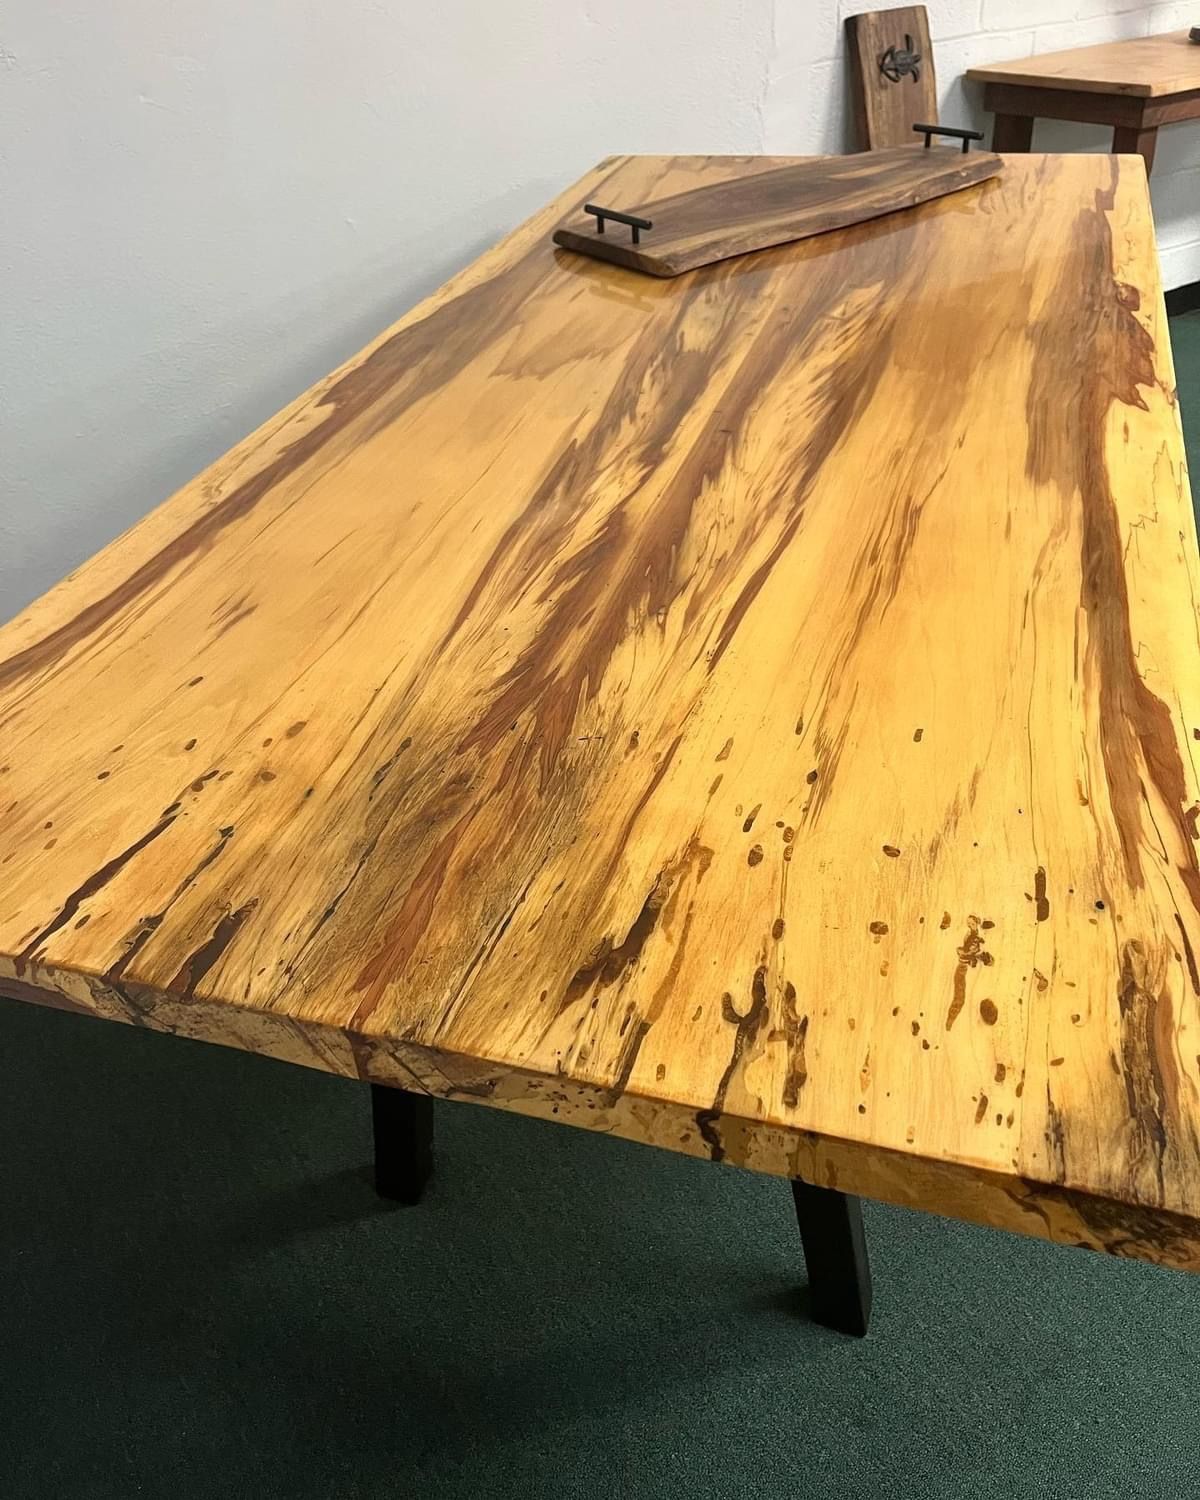 a wooden table is sitting on a concrete floor in a room .